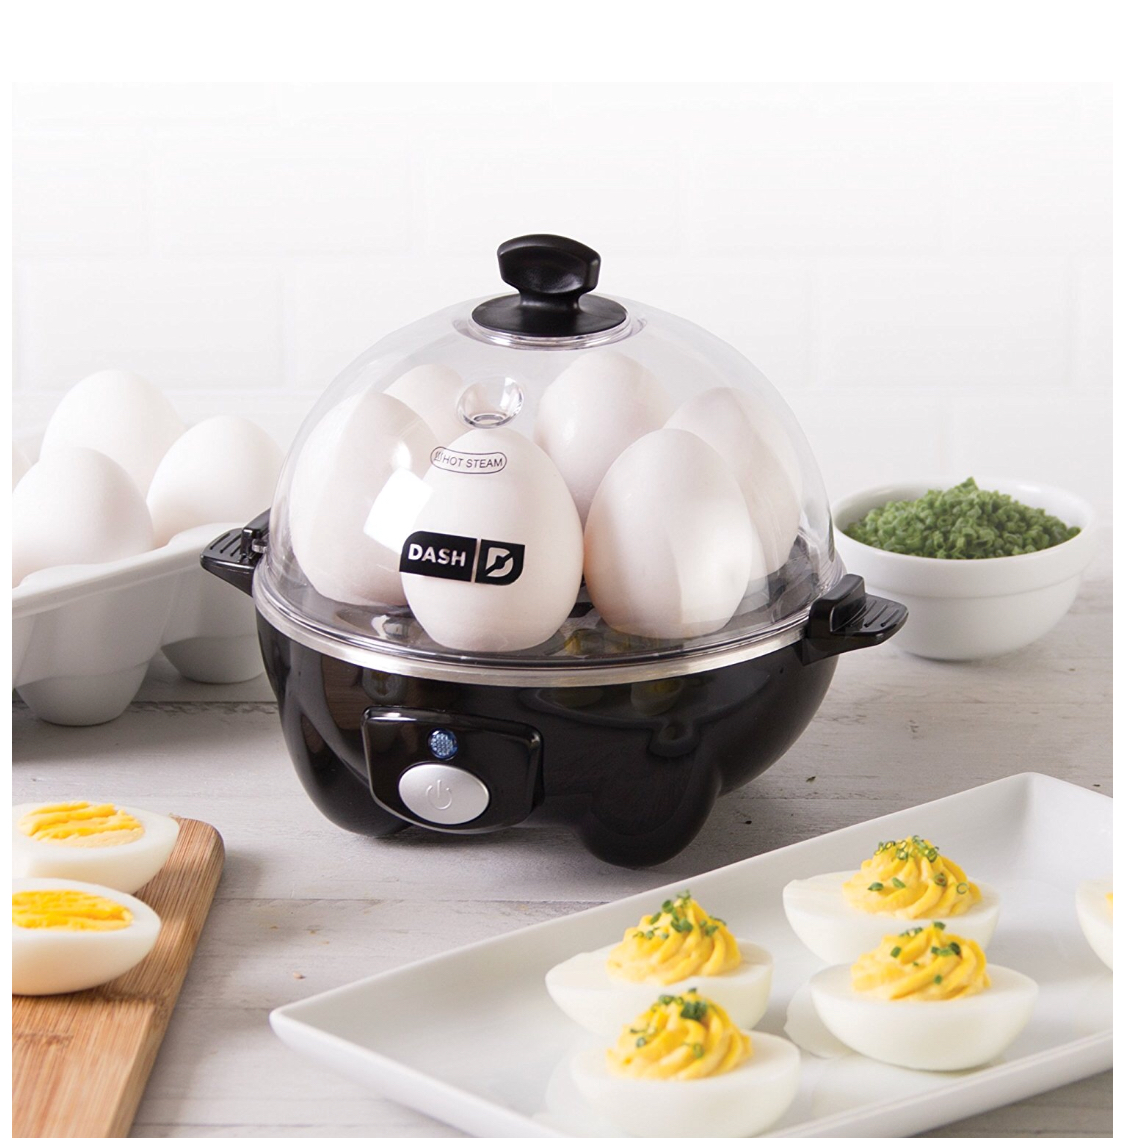 Deluxe Egg Cooker, Easy & Delicious Eggs Every Time, Dash